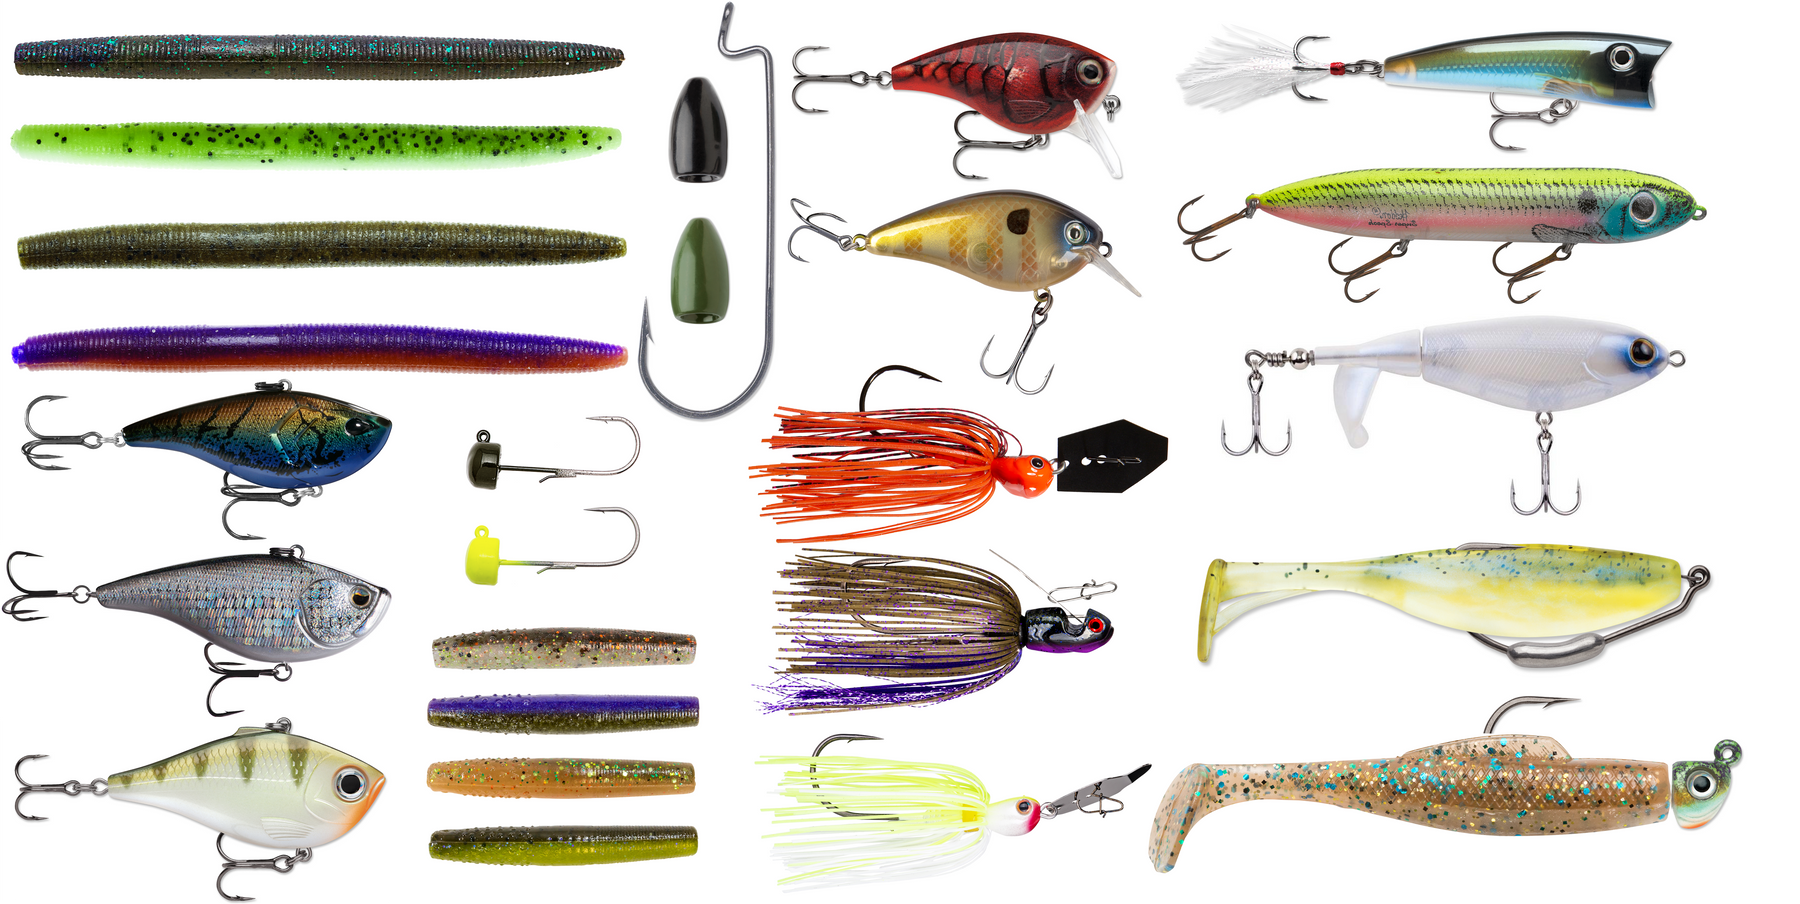 Top 7 Best Bass Fishing Baits & Lures